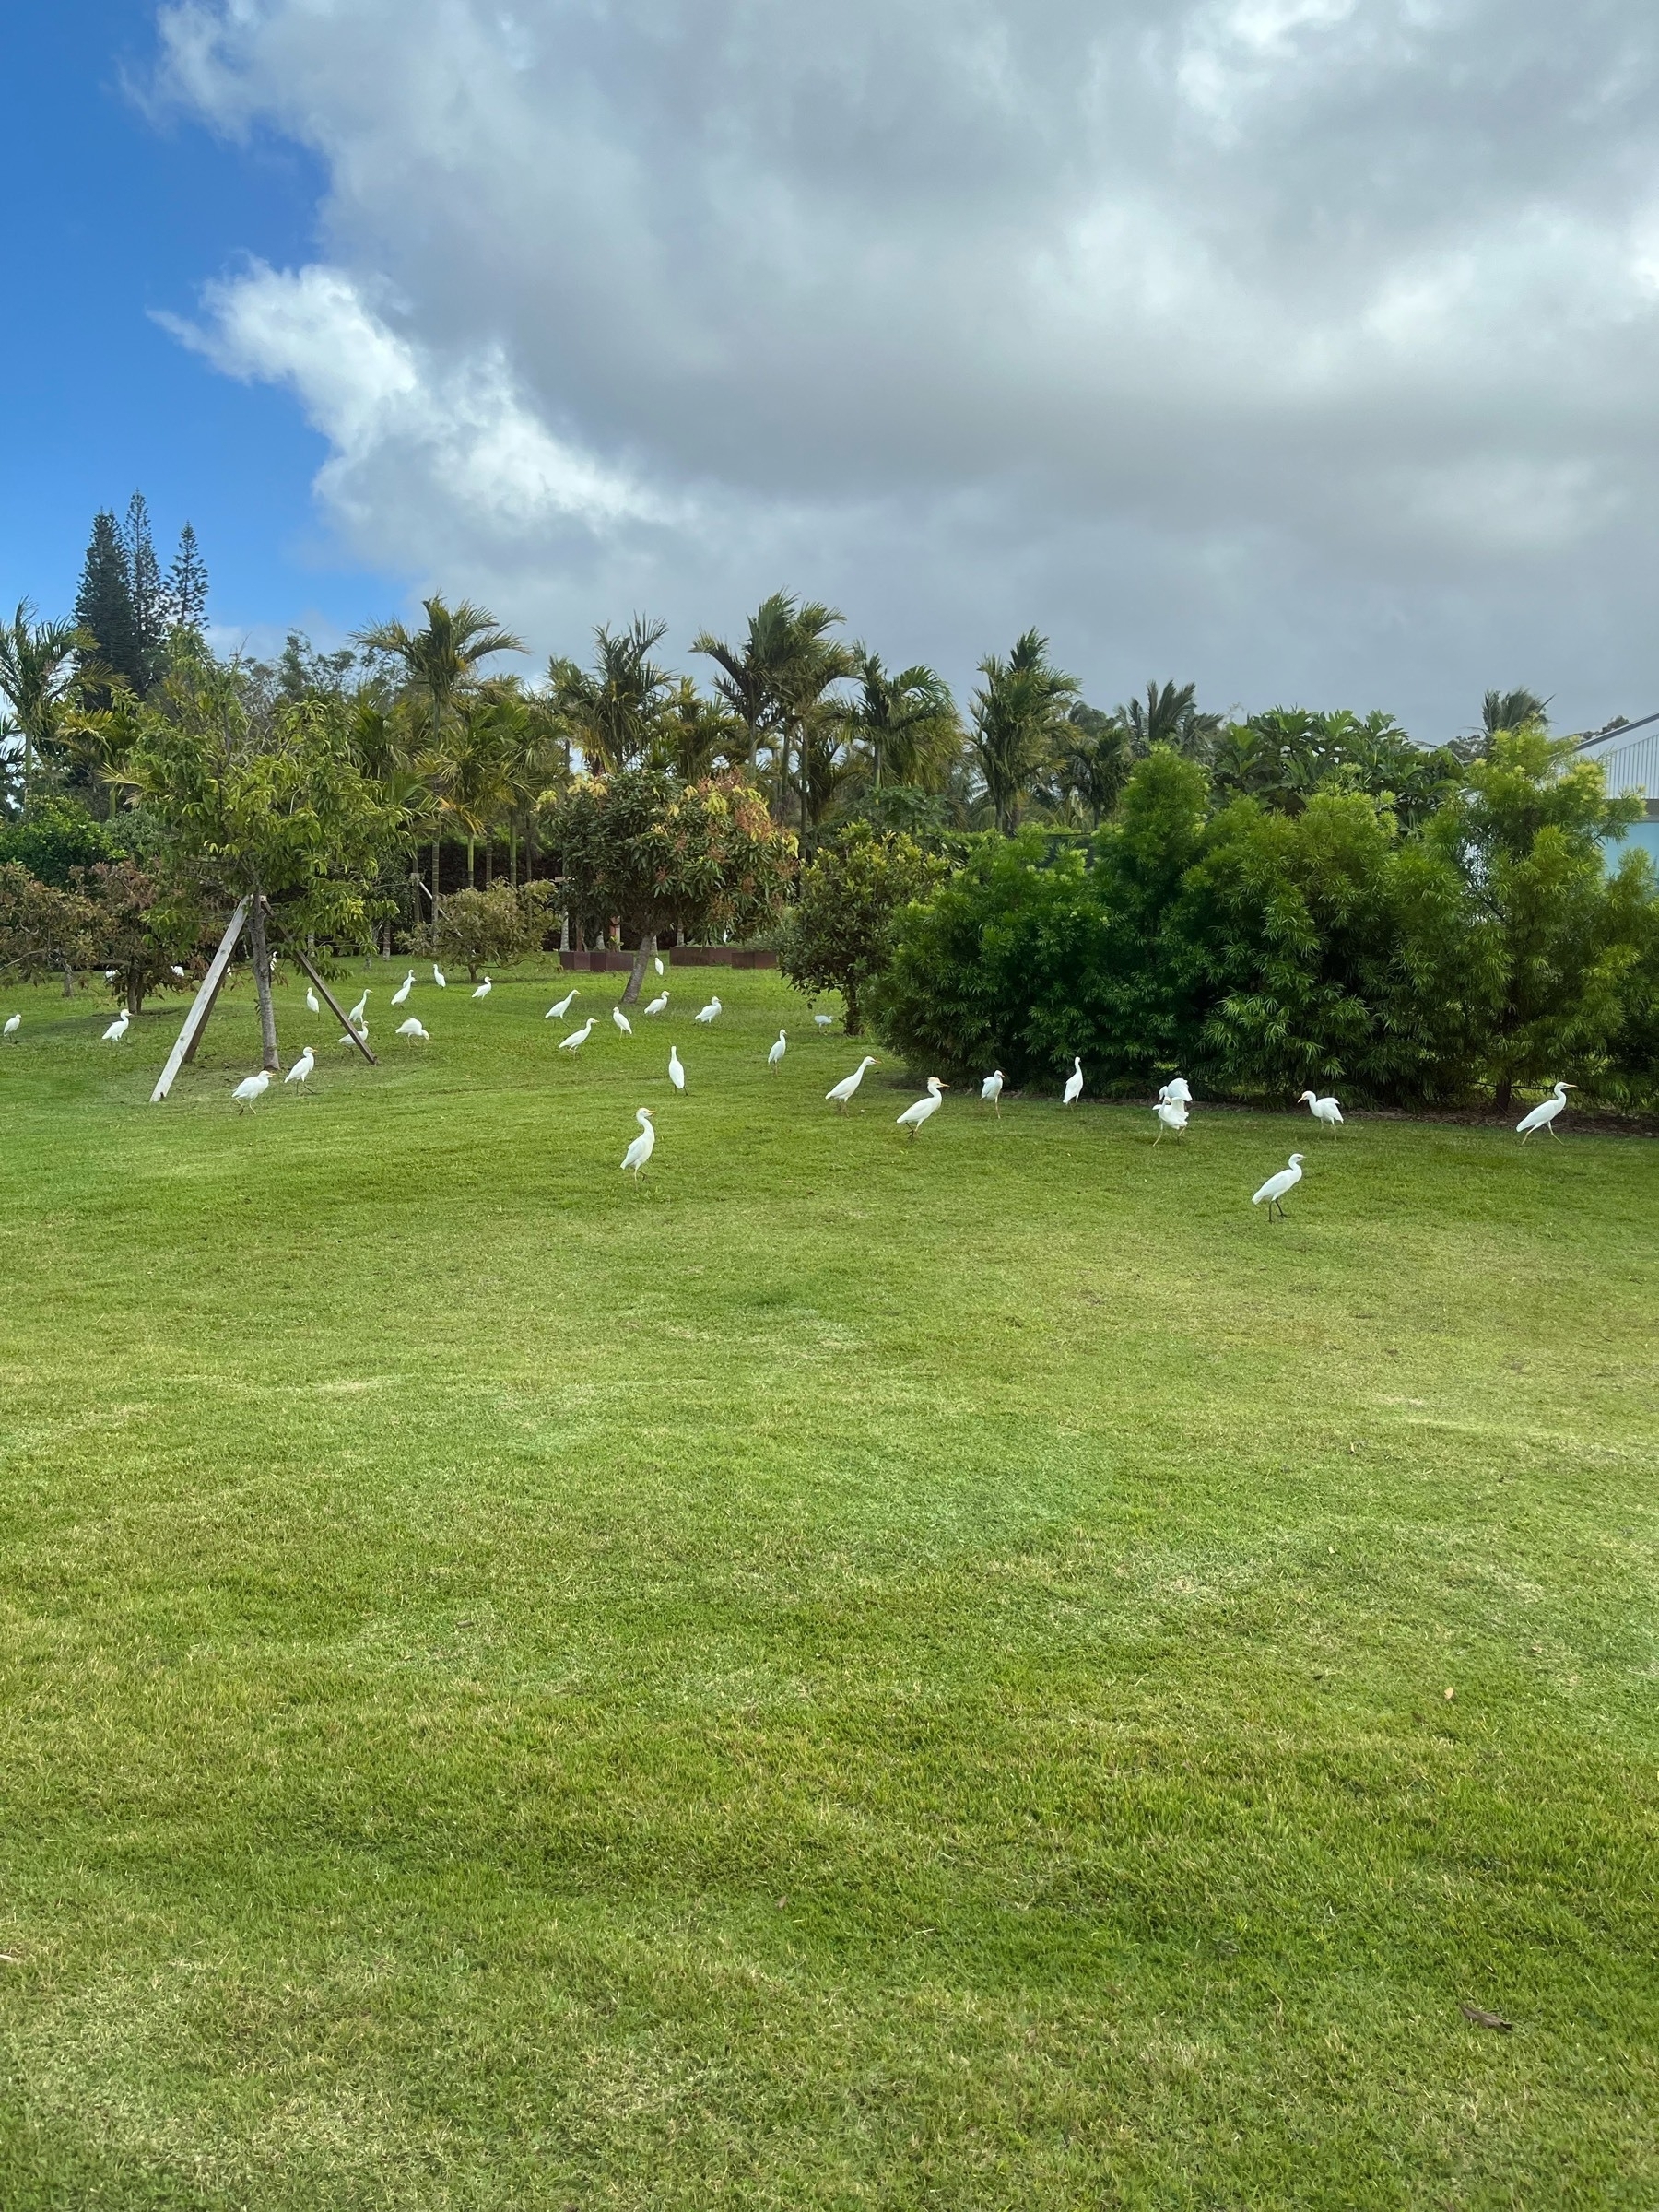 A lot of white egrets on a mown lawn with a mixture trees and bushes around. A patch of blue sky with storm clouds brewing.